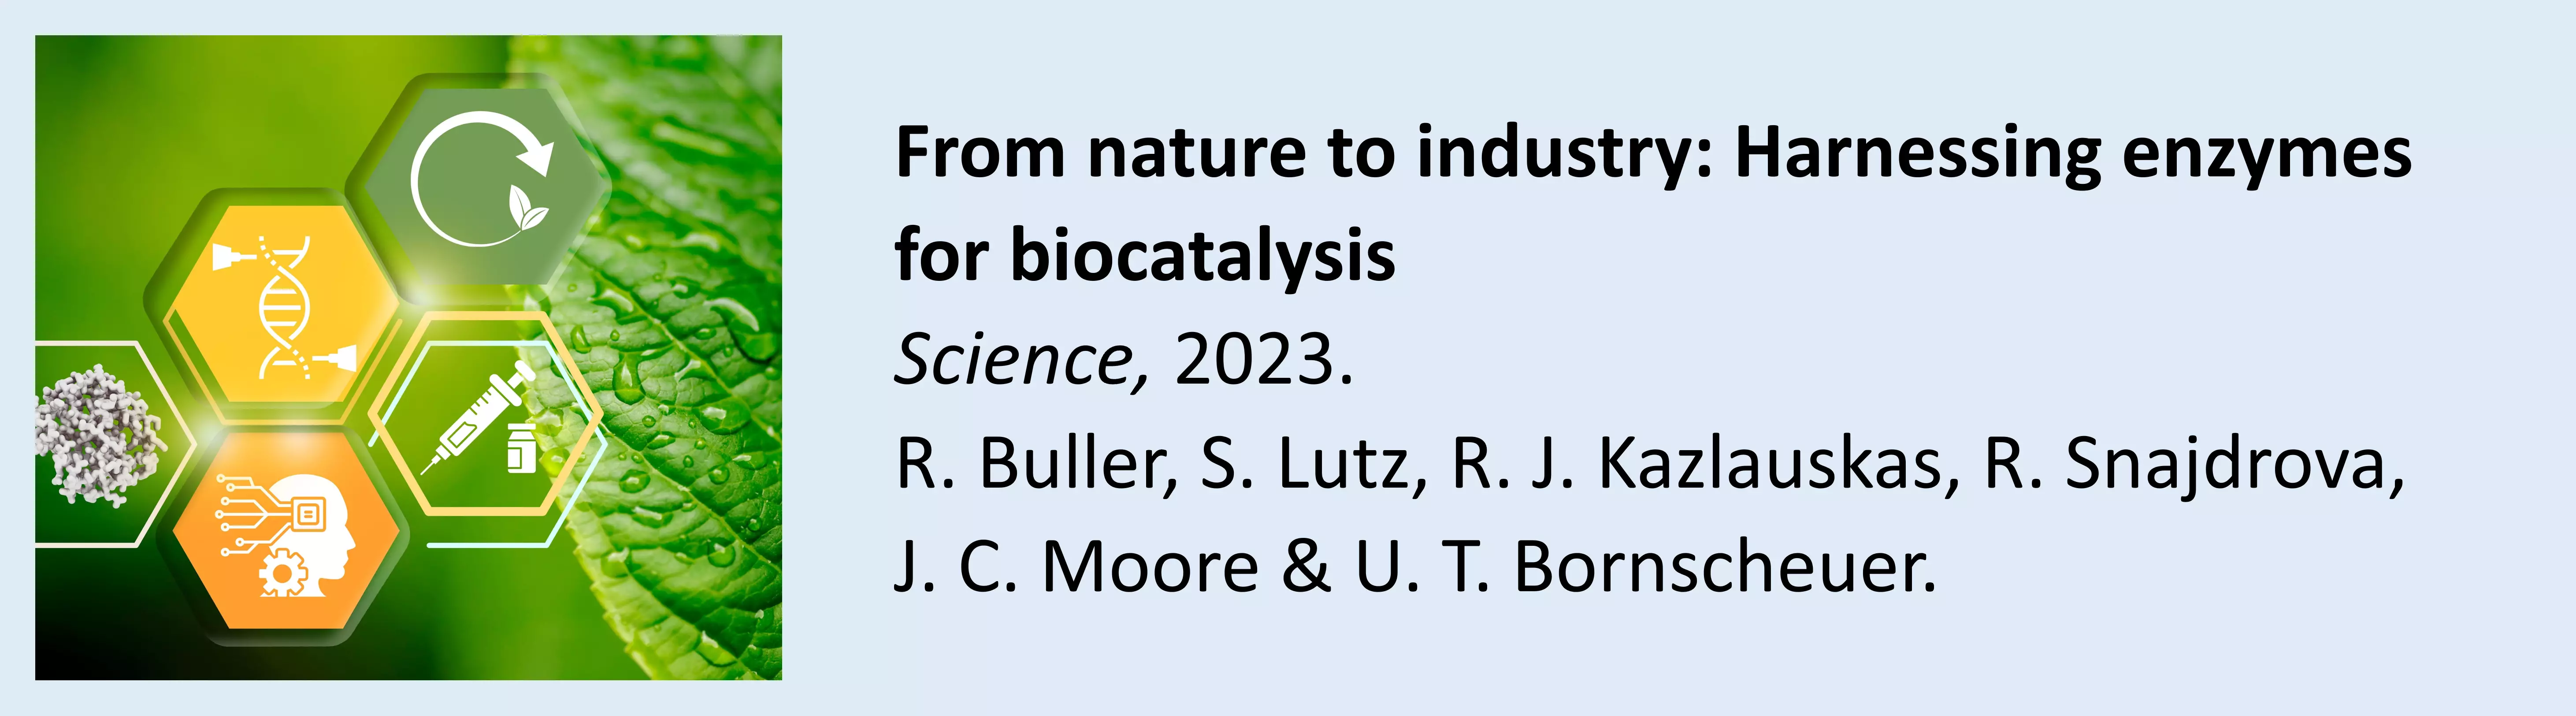 From nature to industry: Harnessing enzymes for biocatalysis